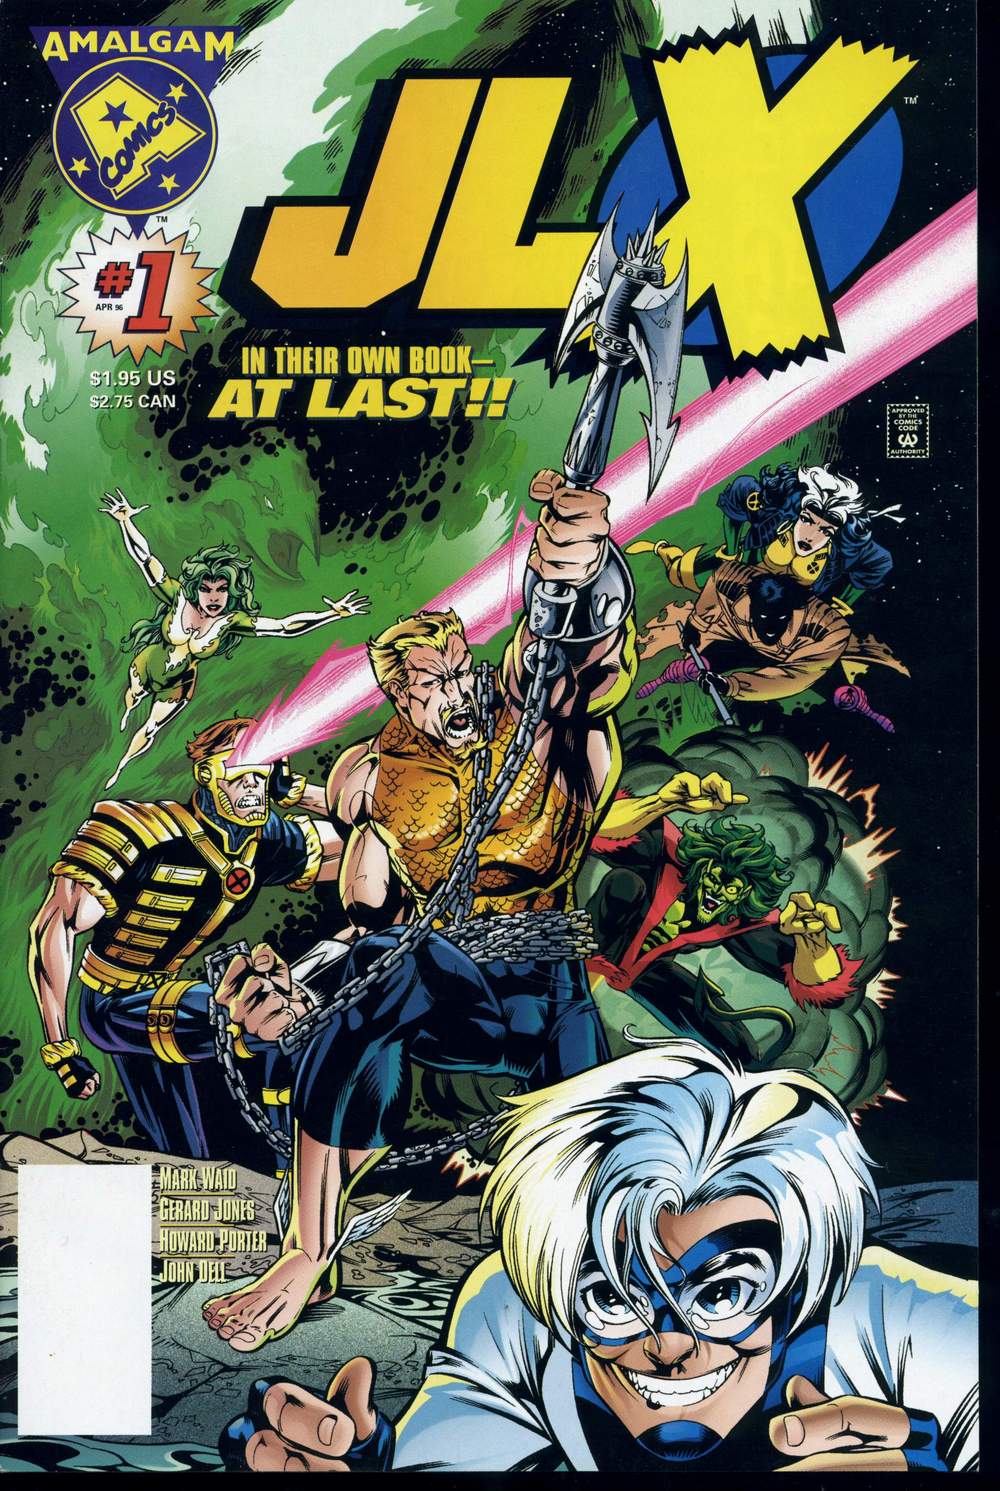 The Judgement League X-Men stand assembled on Howard Porter and John Dell's cover to JLX Vol. 1 #1 "A League of Their Own!" (1996), Marvel Comics/DC